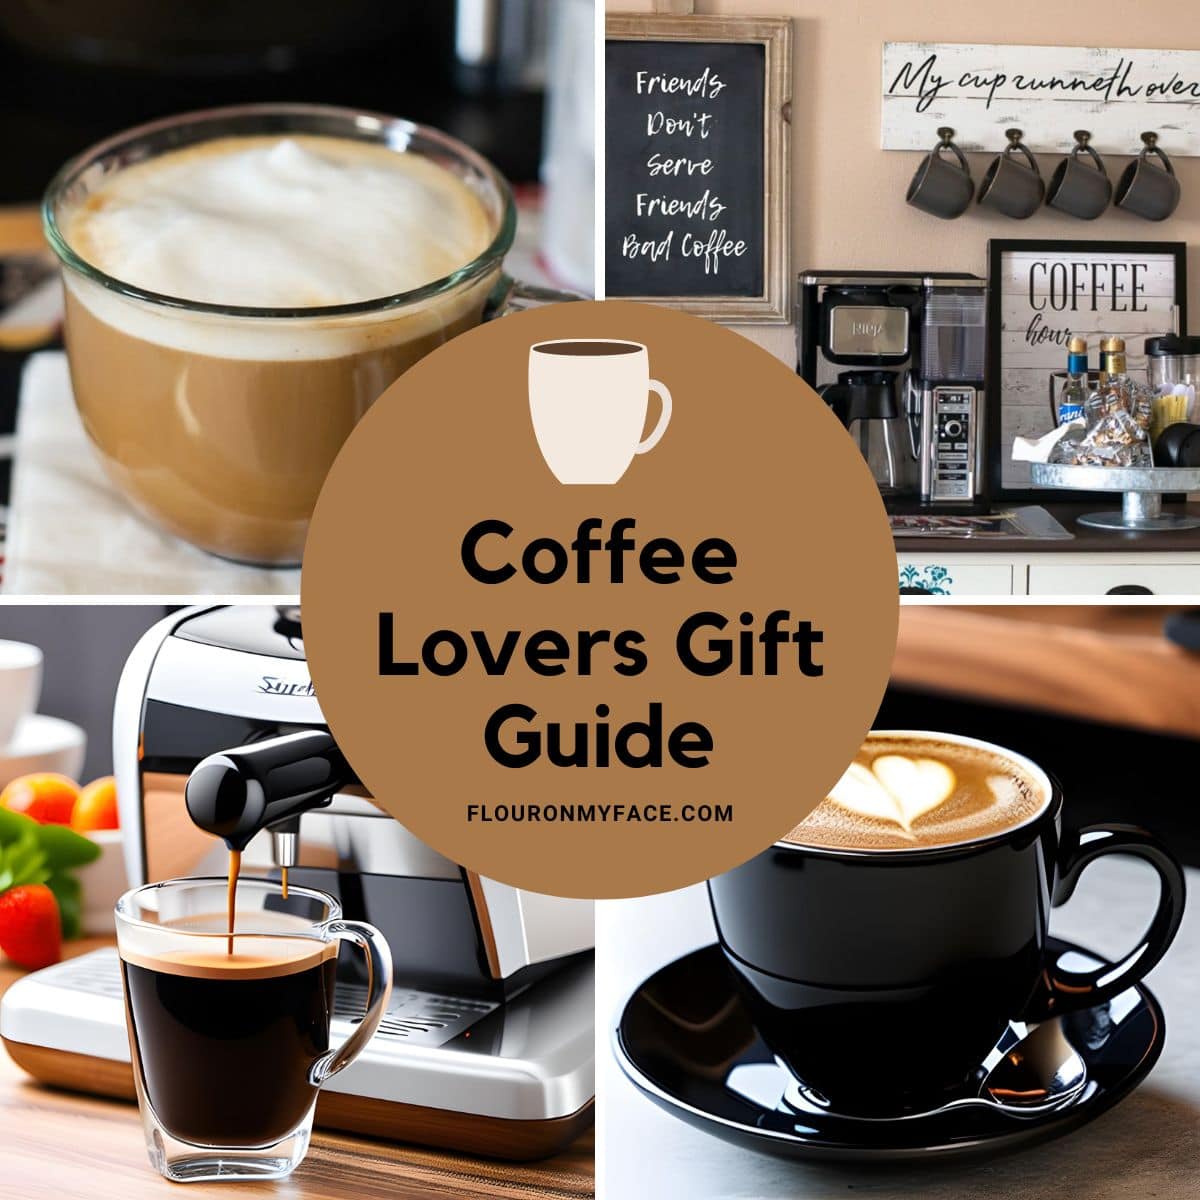 Coffee Lovers Gift Guide * Zesty Olive - Simple, Tasty, and Healthy Recipes